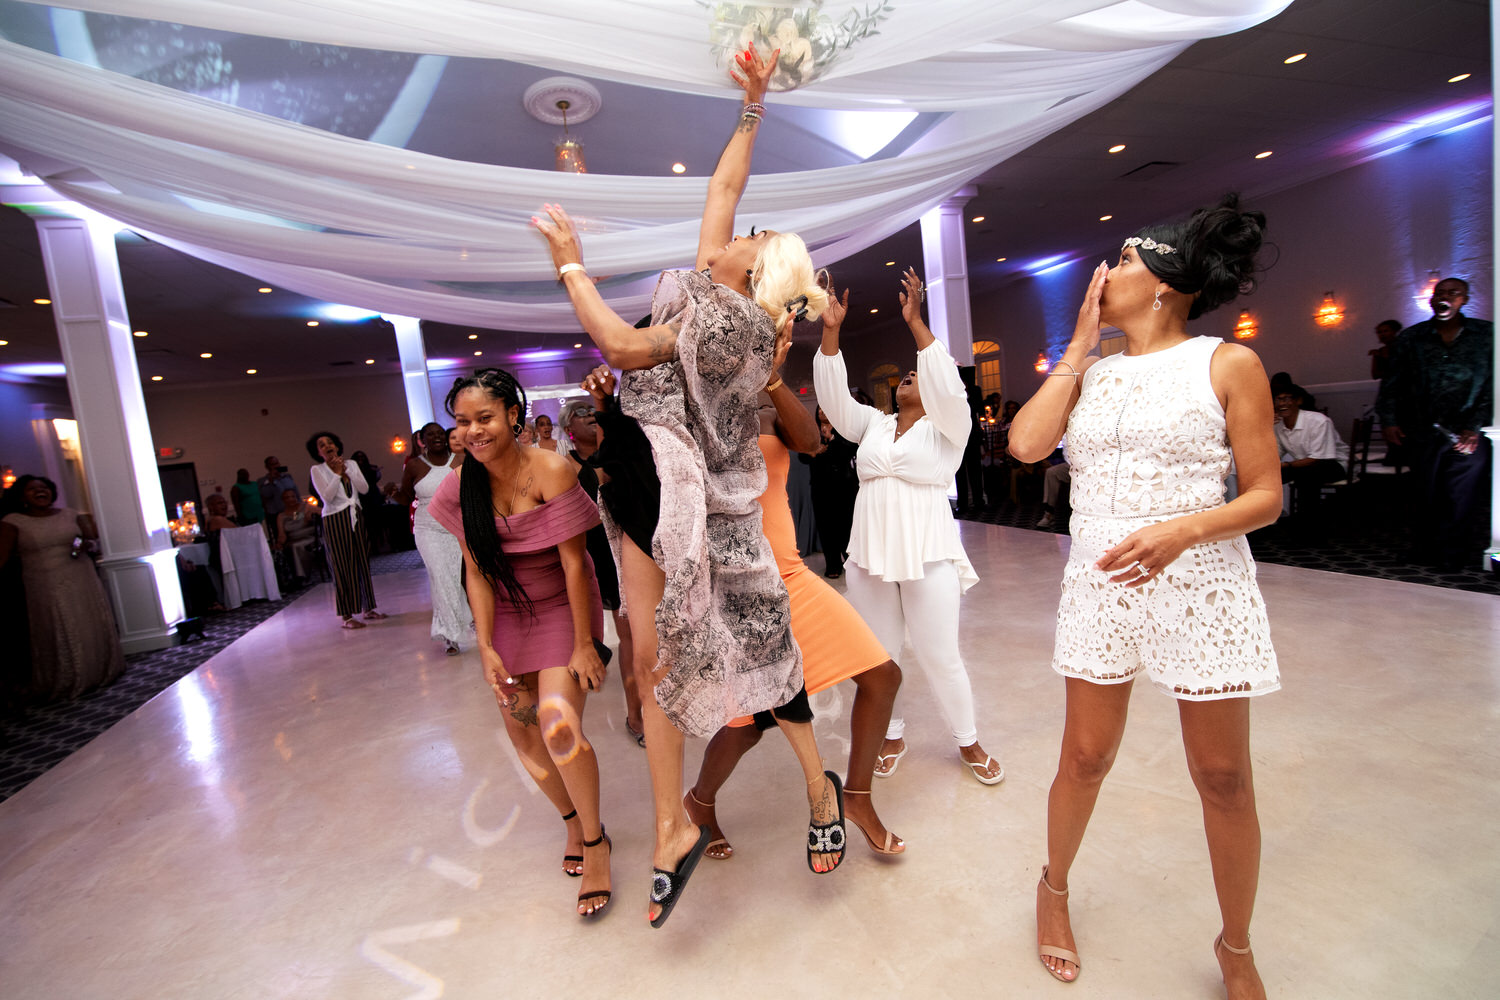 Family jumping up for a bouquet, showing why you should have candid wedding photography